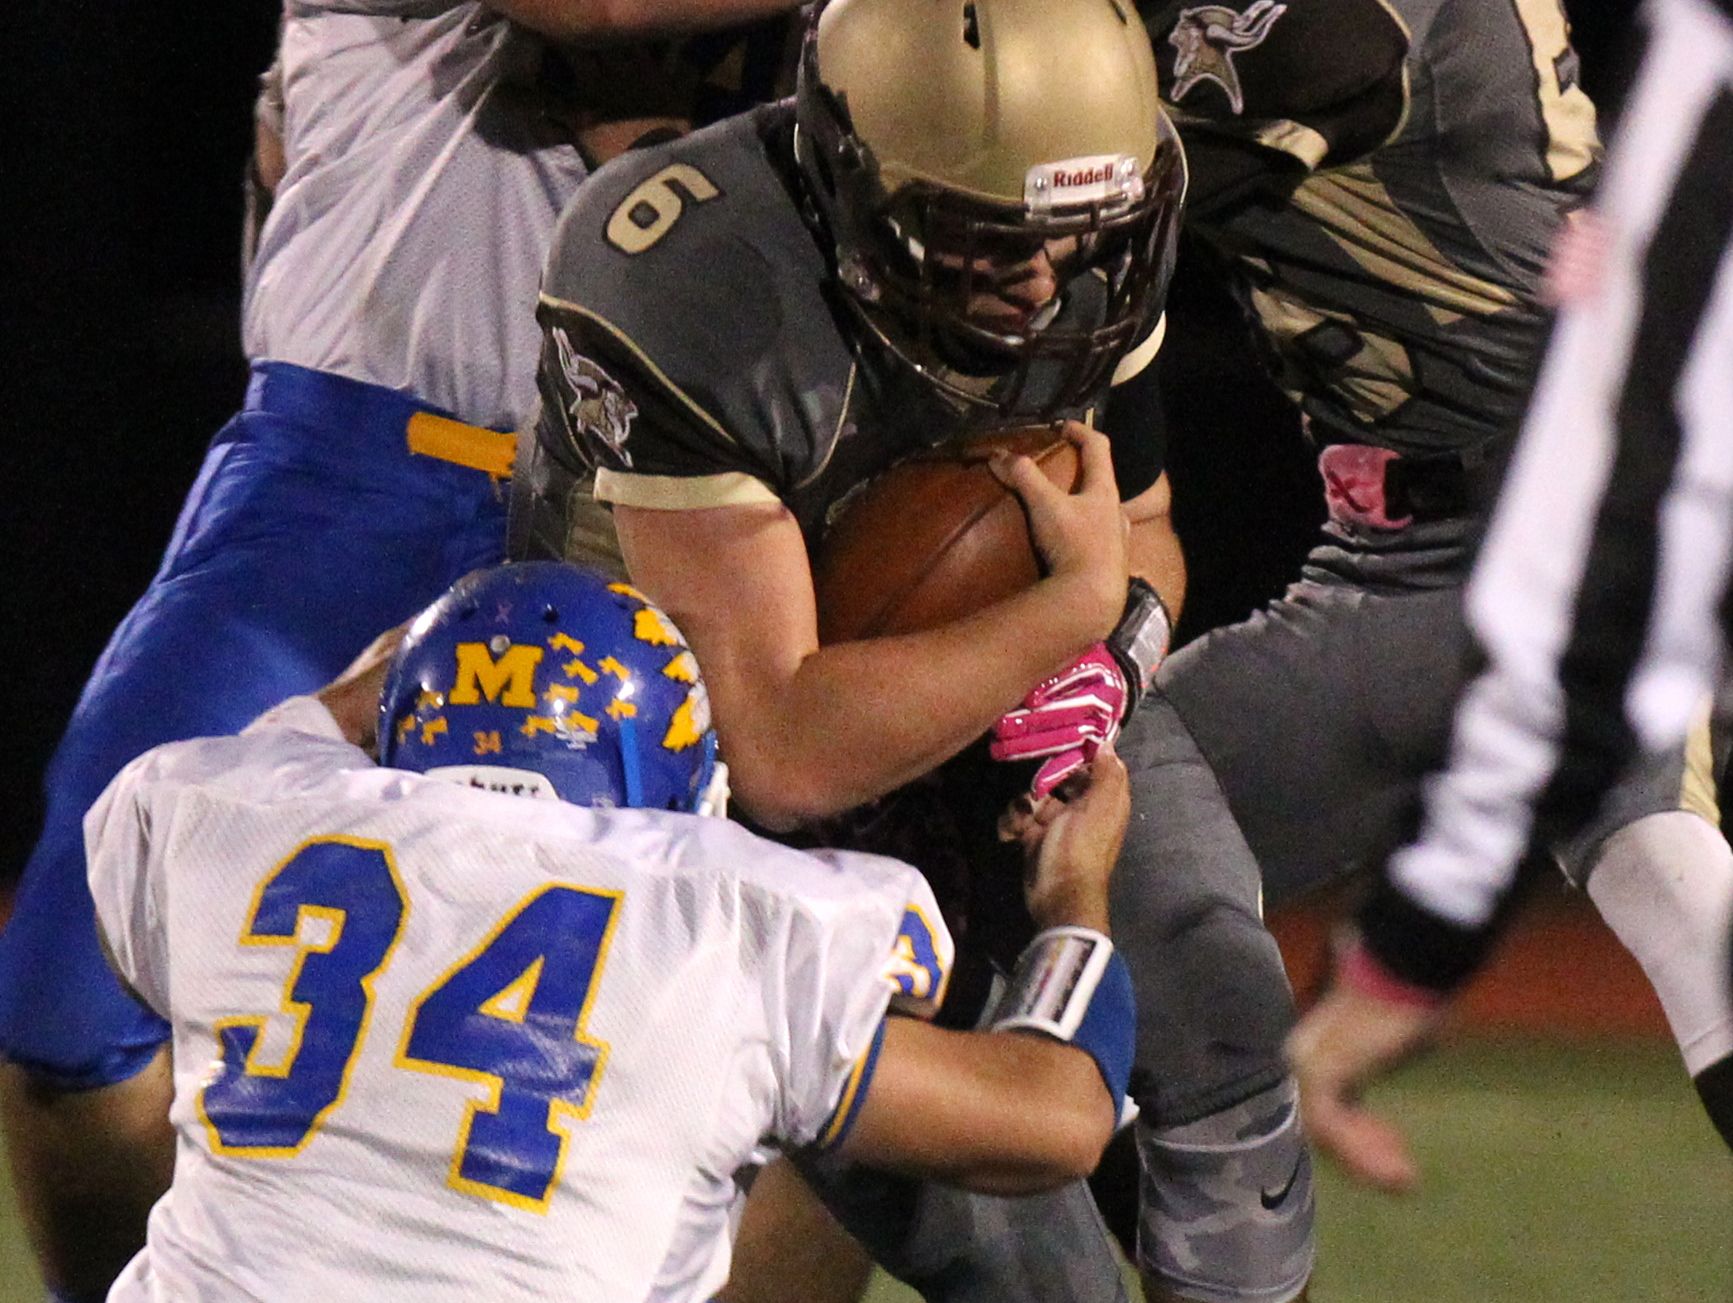 Clarkstown South's Matt Jung is tackled by Mahopac's Justin Munoz (34) during their Class AA playoff game at Clarkstown South Oct. 14, 2016.